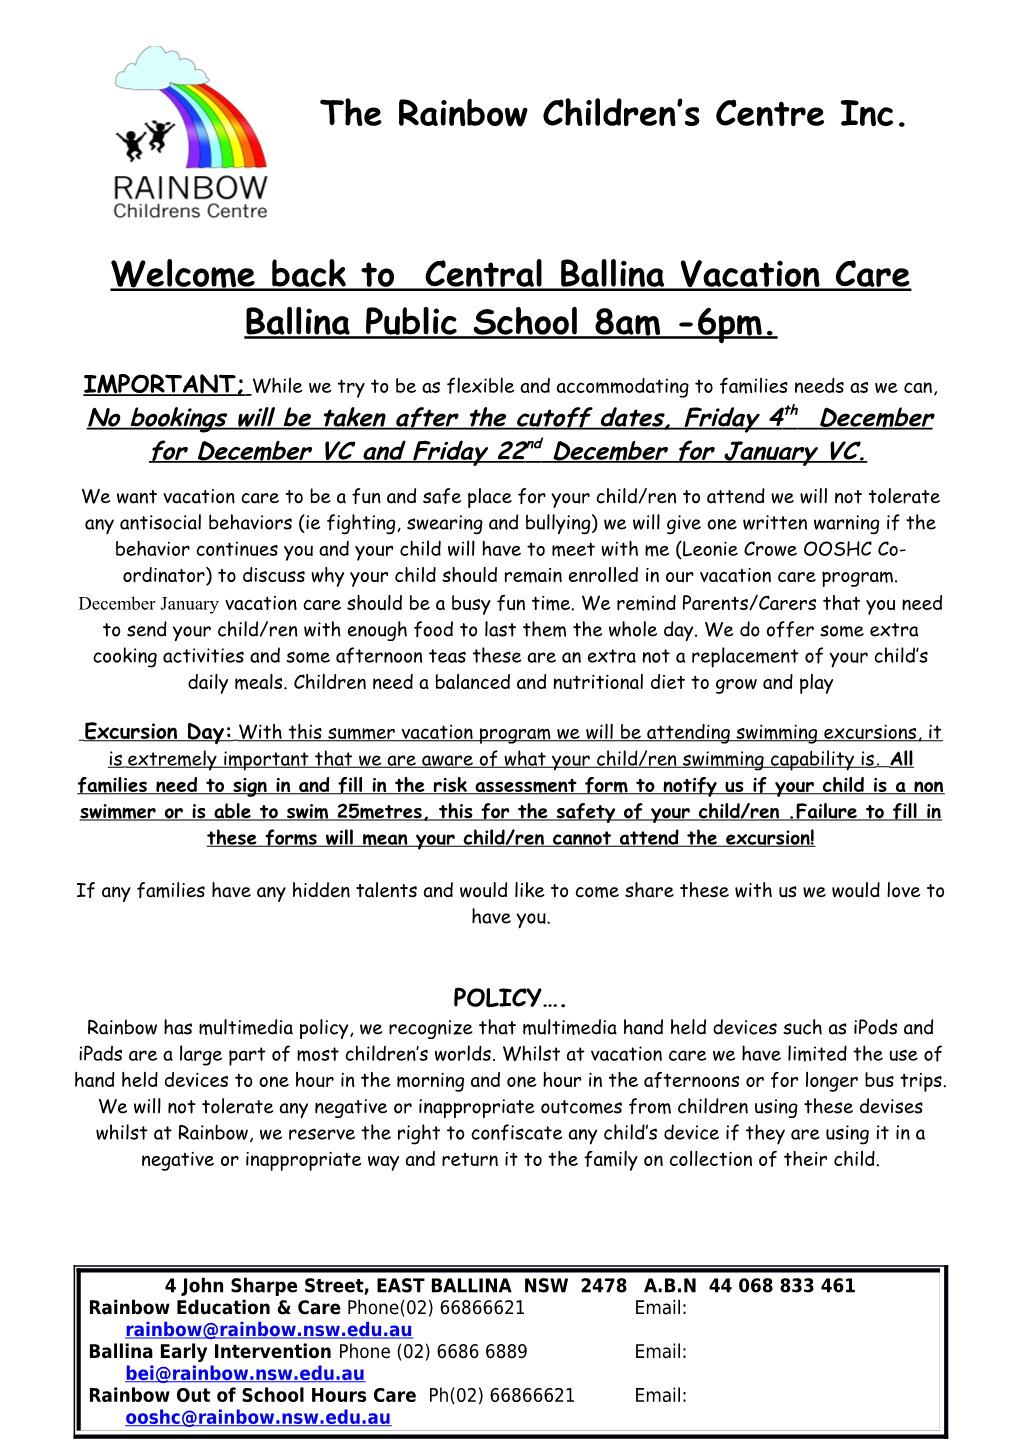 Welcome Back to Central Ballina Vacation Care